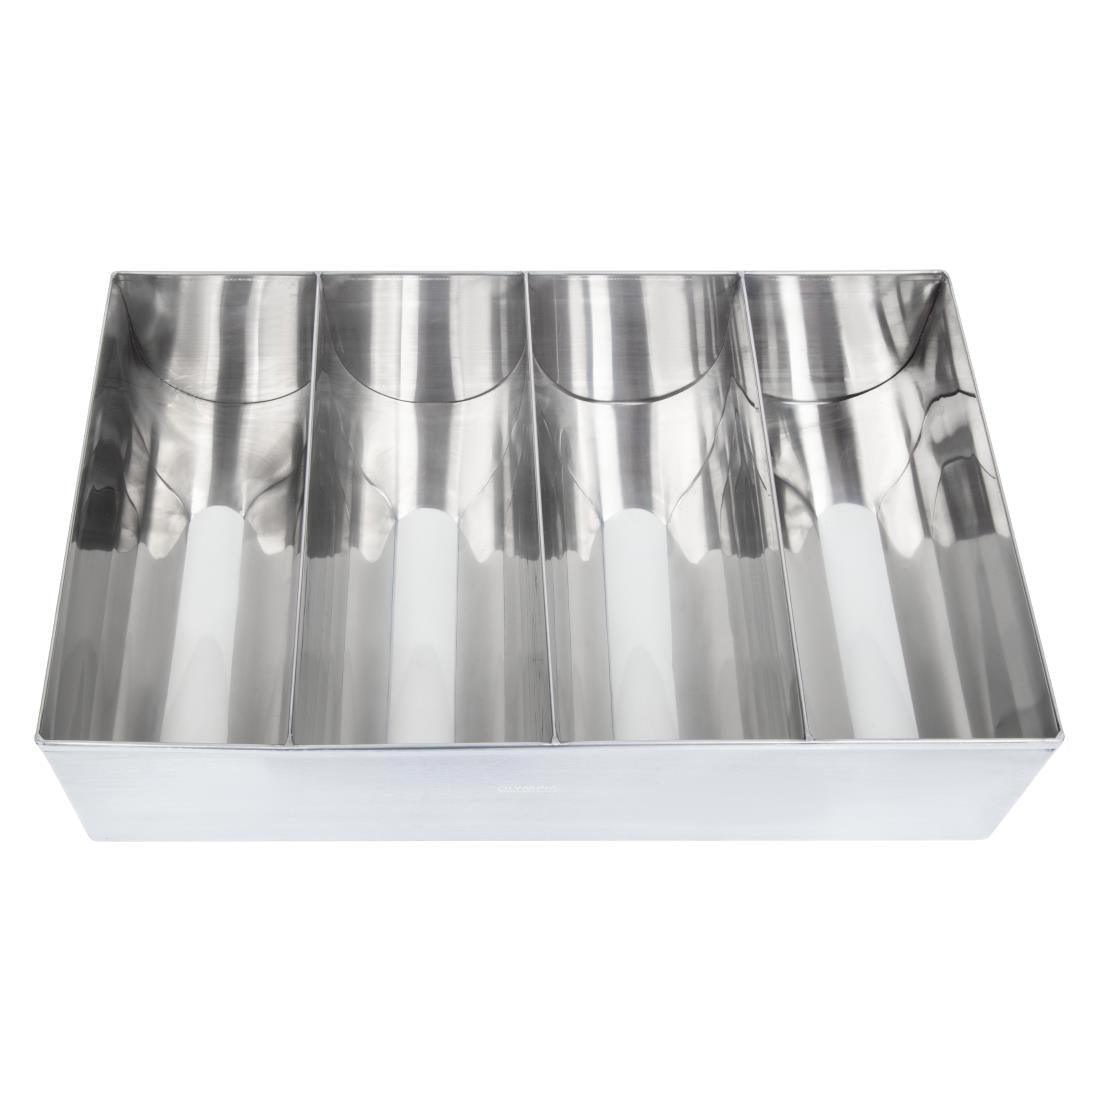 Olympia DM274 Cutlery Holder 4 Compartment St/St - 415x255x105mm - HospoStore